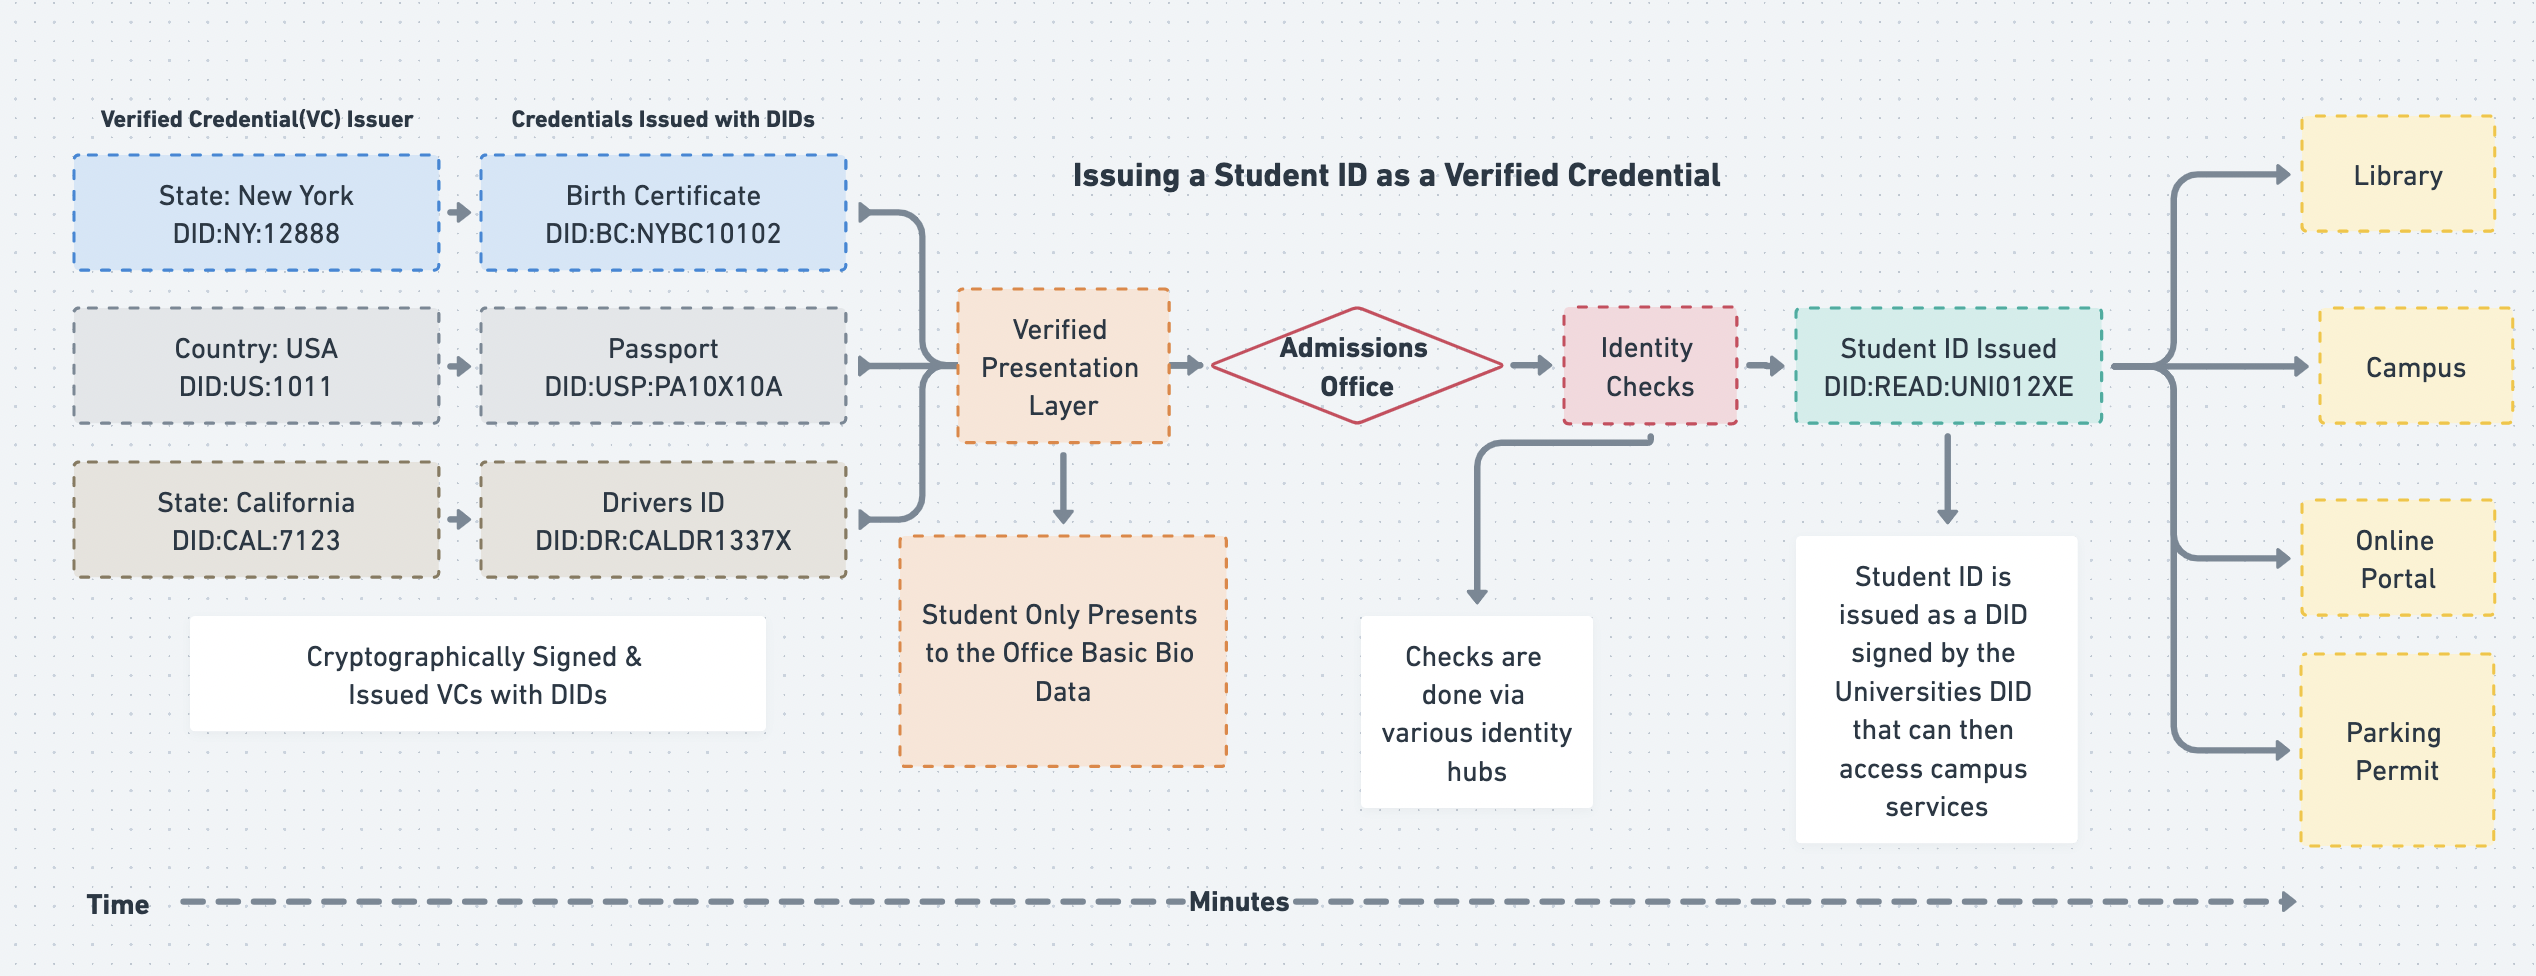 Issuing a Student ID as a Verifiable Credential